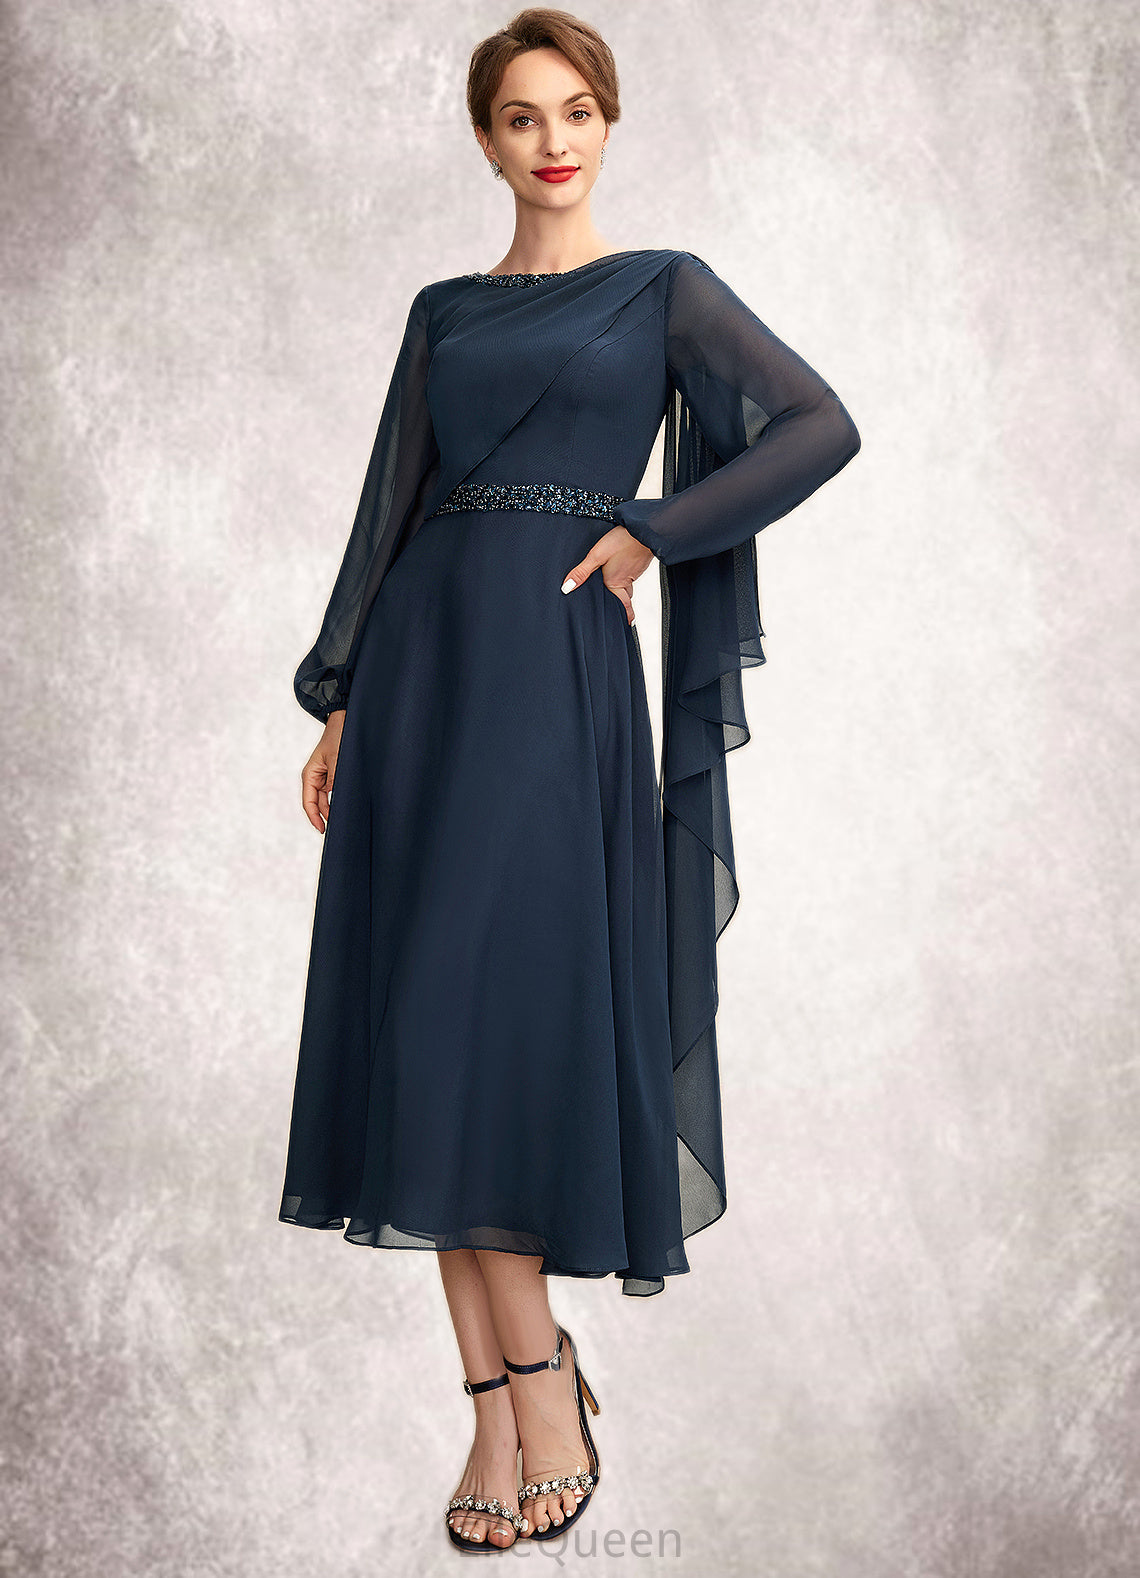 Samantha A-Line Scoop Neck Tea-Length Chiffon Mother of the Bride Dress With Beading Sequins DG126P0015018